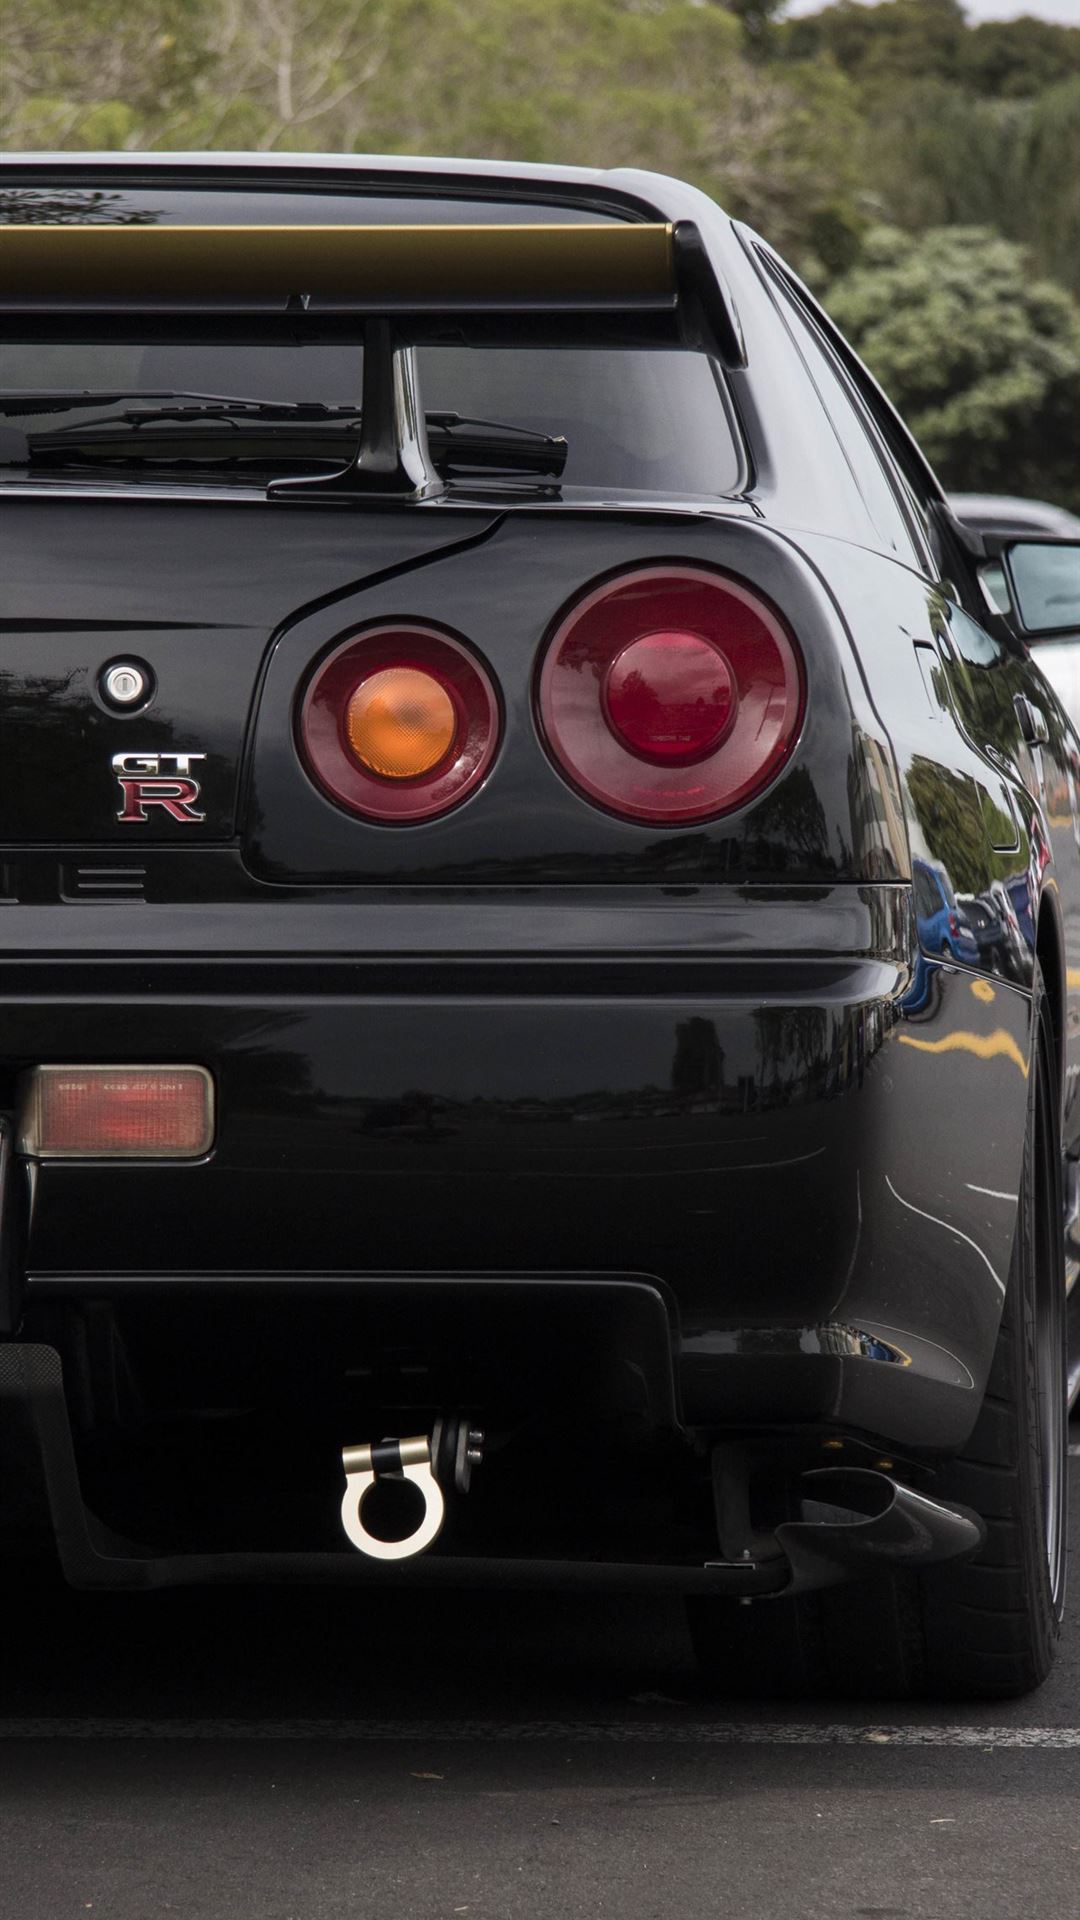 nissan skyline gt r r34 iPhone Wallpapers Free Download